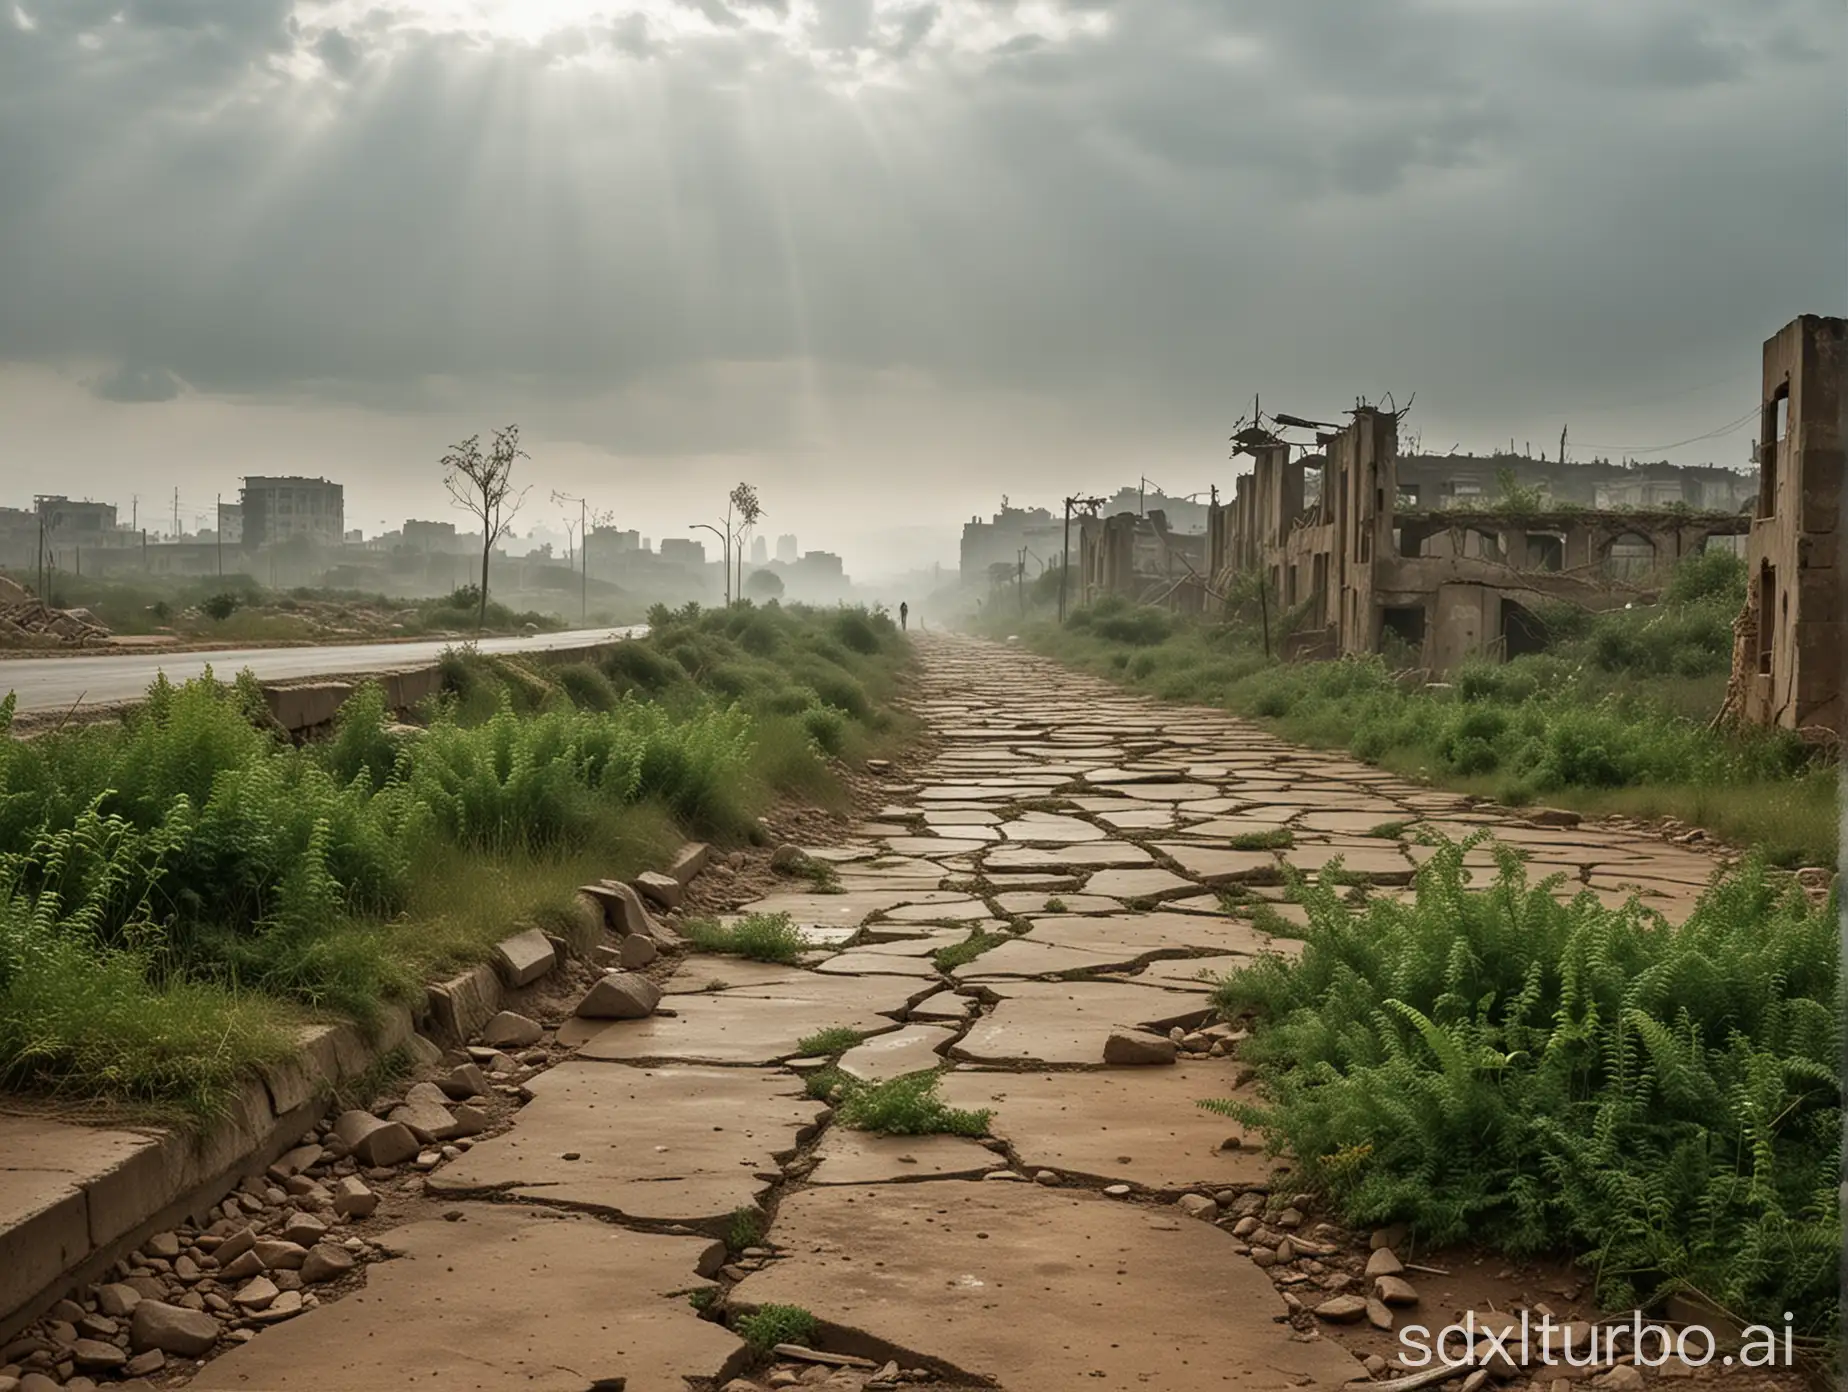 A post-apocalyptic scene dominated by the resilient greenery that has taken over the ruins of a once-thriving city. The broken buildings in the background are barely visible through the thick layer of dust and clouds that cover the sky, casting an eerie, dusty haze over the entire scene. The remnants of civilization are scattered across the ground, with crumbling roads and overgrown parks serving as a somber reminder of the world that was. Despite the gloomy atmosphere, delicate tendrils of green life manage to snake their way through cracks in concrete and stone, a testament to the enduring power of nature. The broken pieces of a once-shining city serve as a stark contrast to the vibrant greenery that now surrounds them, creating a surreal and hauntingly beautiful juxtaposition. The dusty and cloudy weather only serves to emphasize the desolation and loneliness of the setting, as if the world itself is struggling to breathe beneath the weight of its own decay.